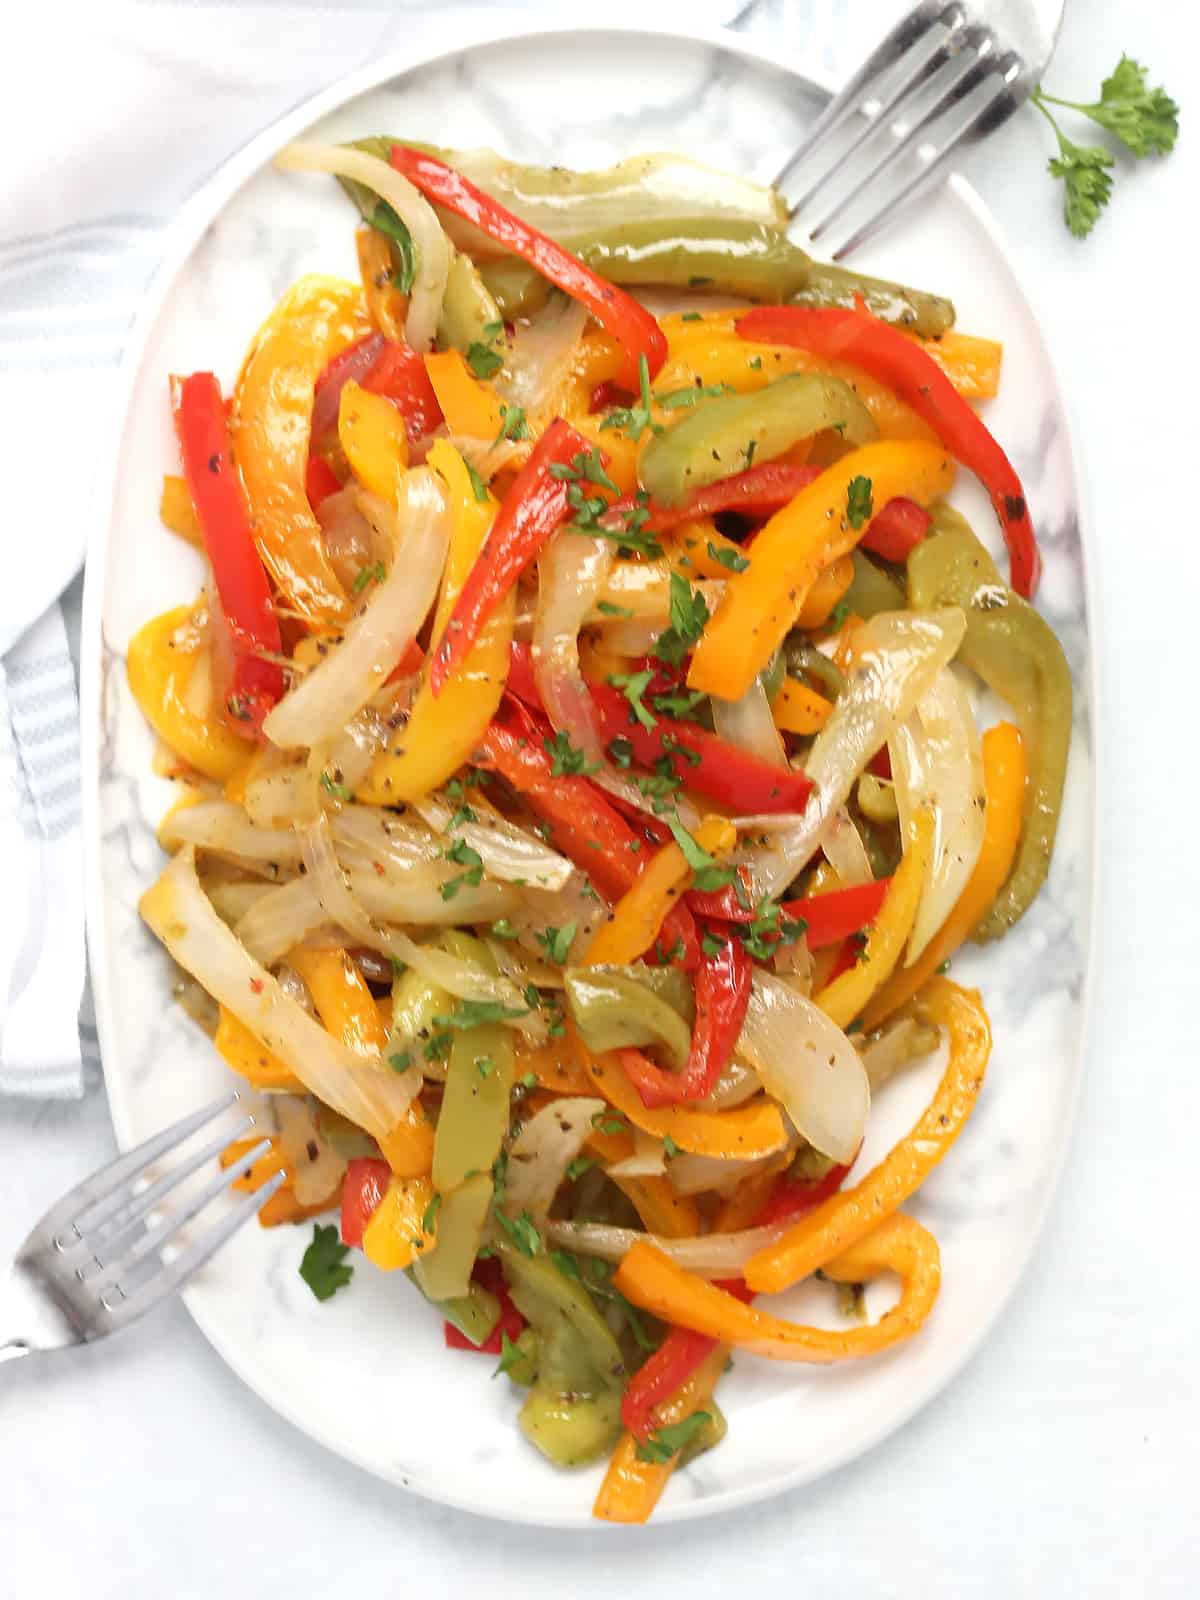 Sautéed Bell Peppers and Onions